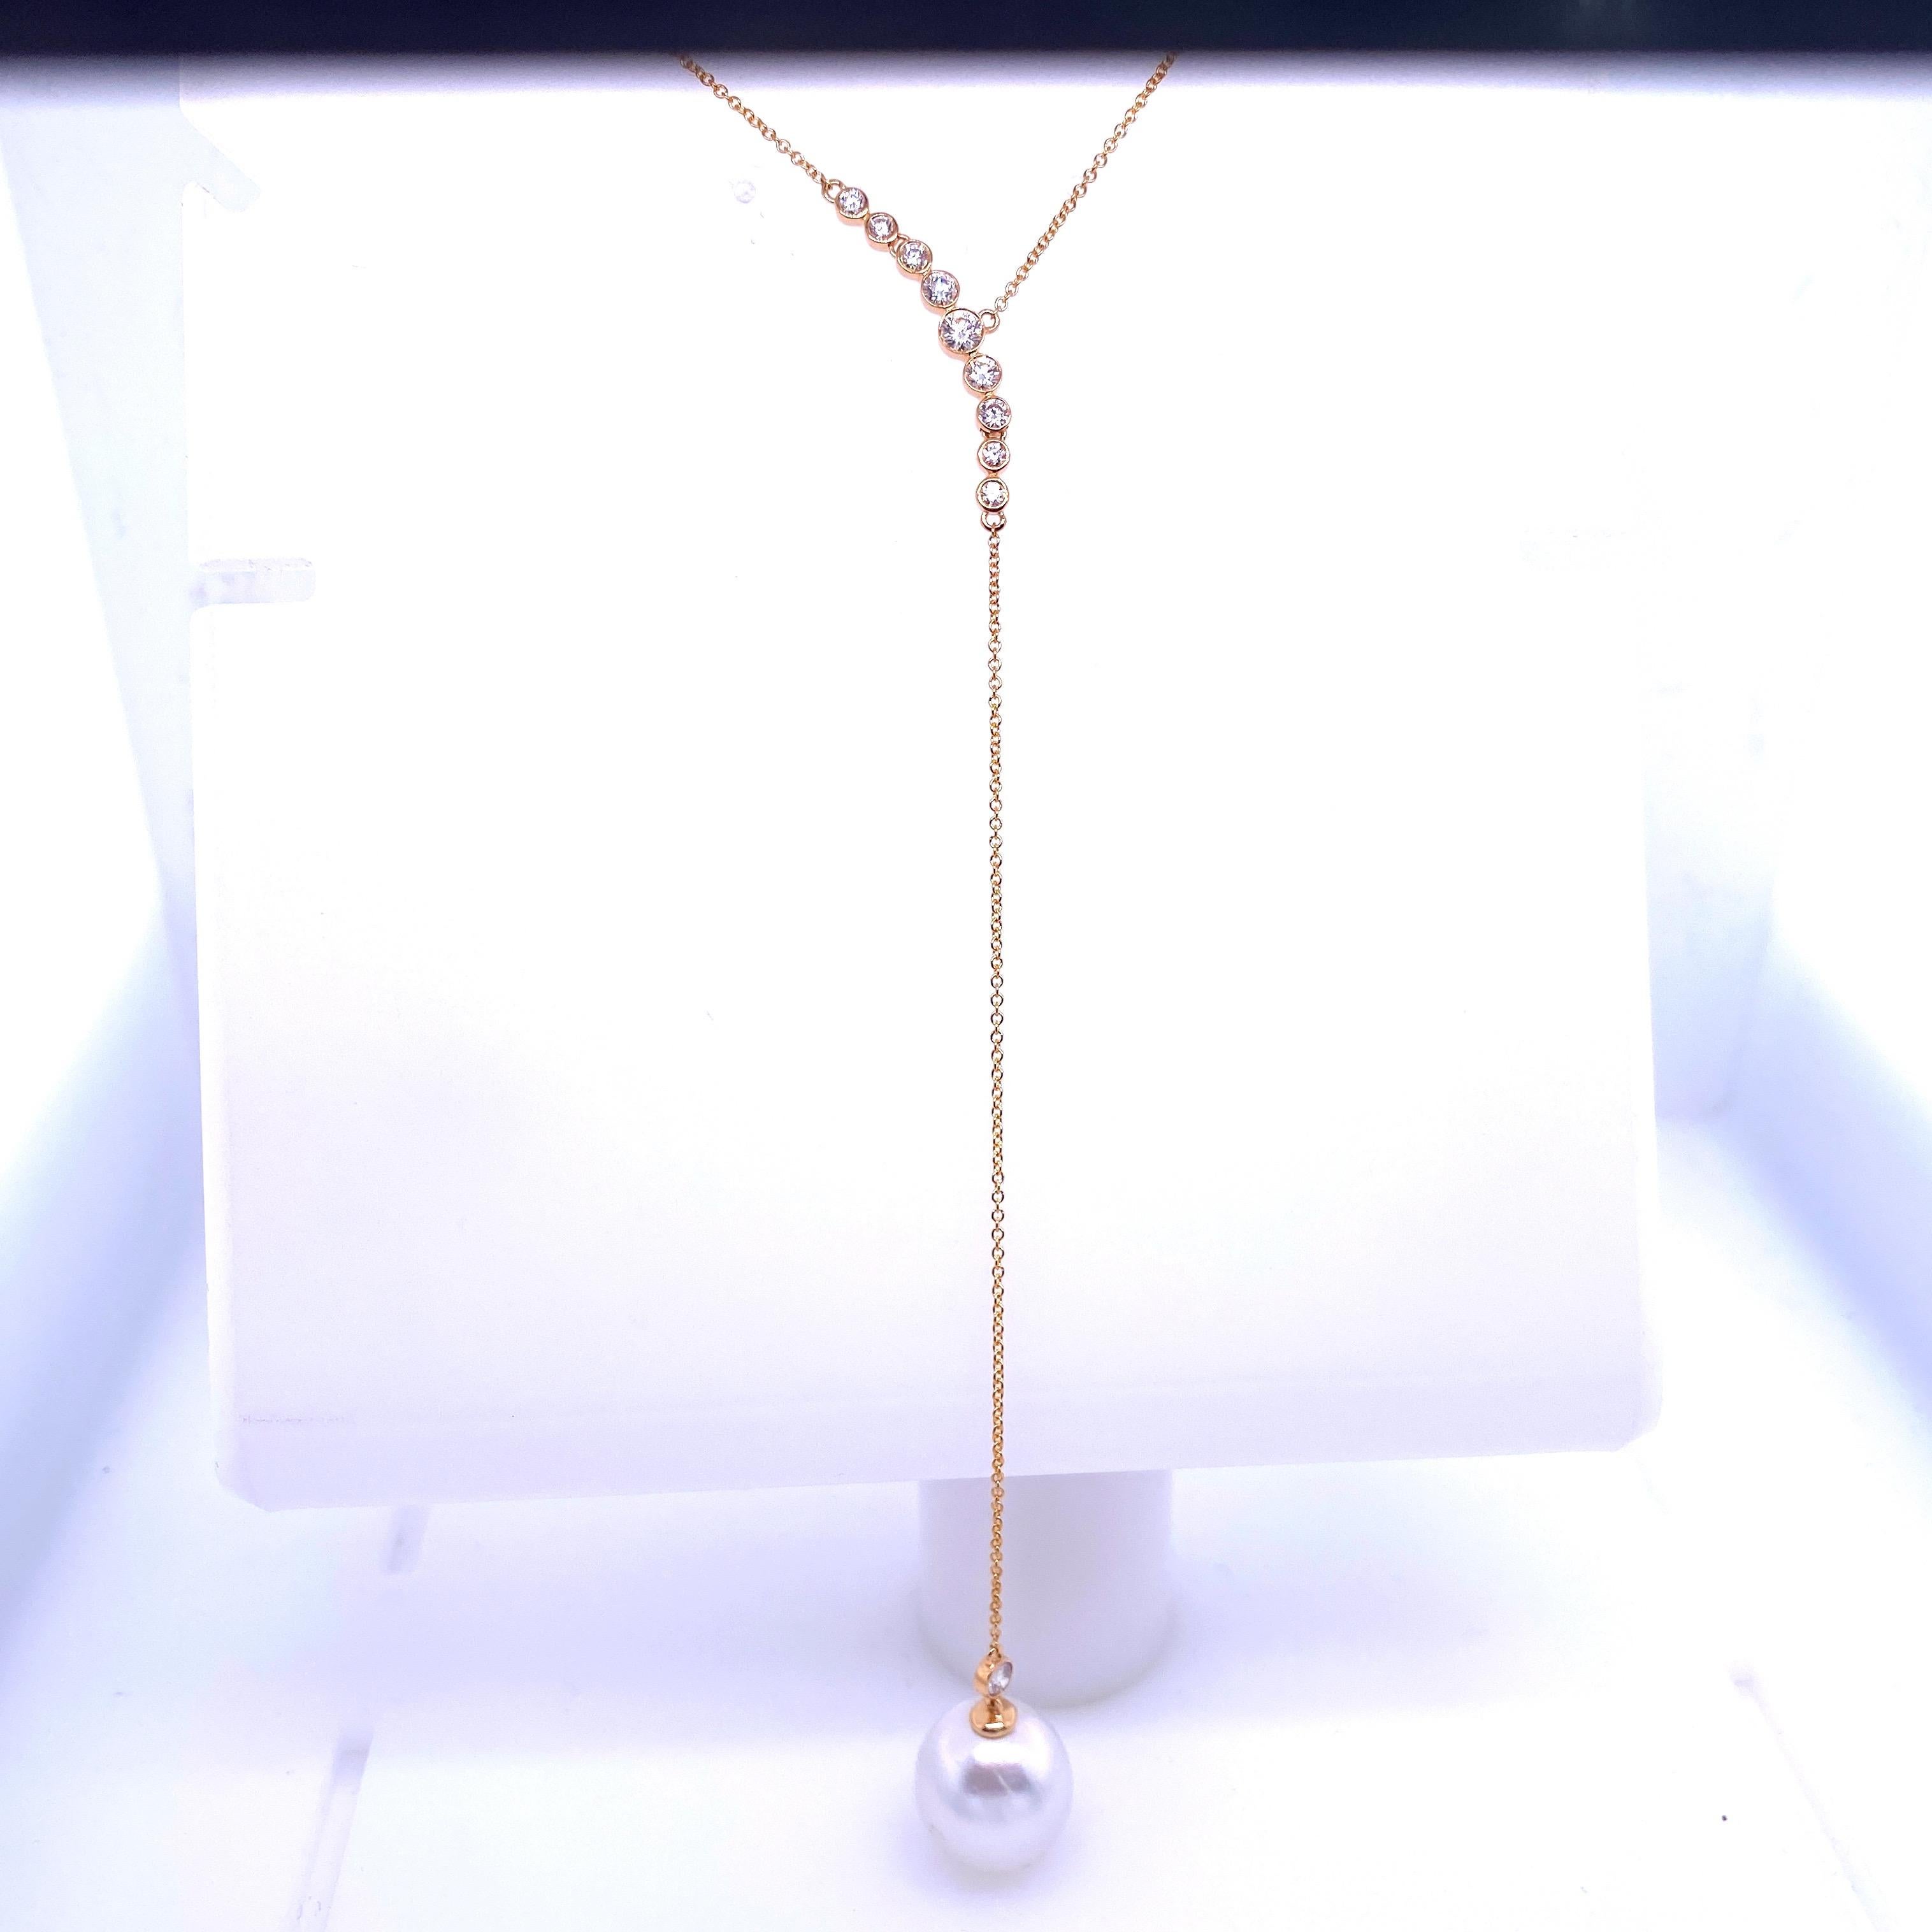 South Sea Pearl Diamond Lariat Necklace 0.51 Carat 18 Karat Yellow Gold In New Condition For Sale In New York, NY